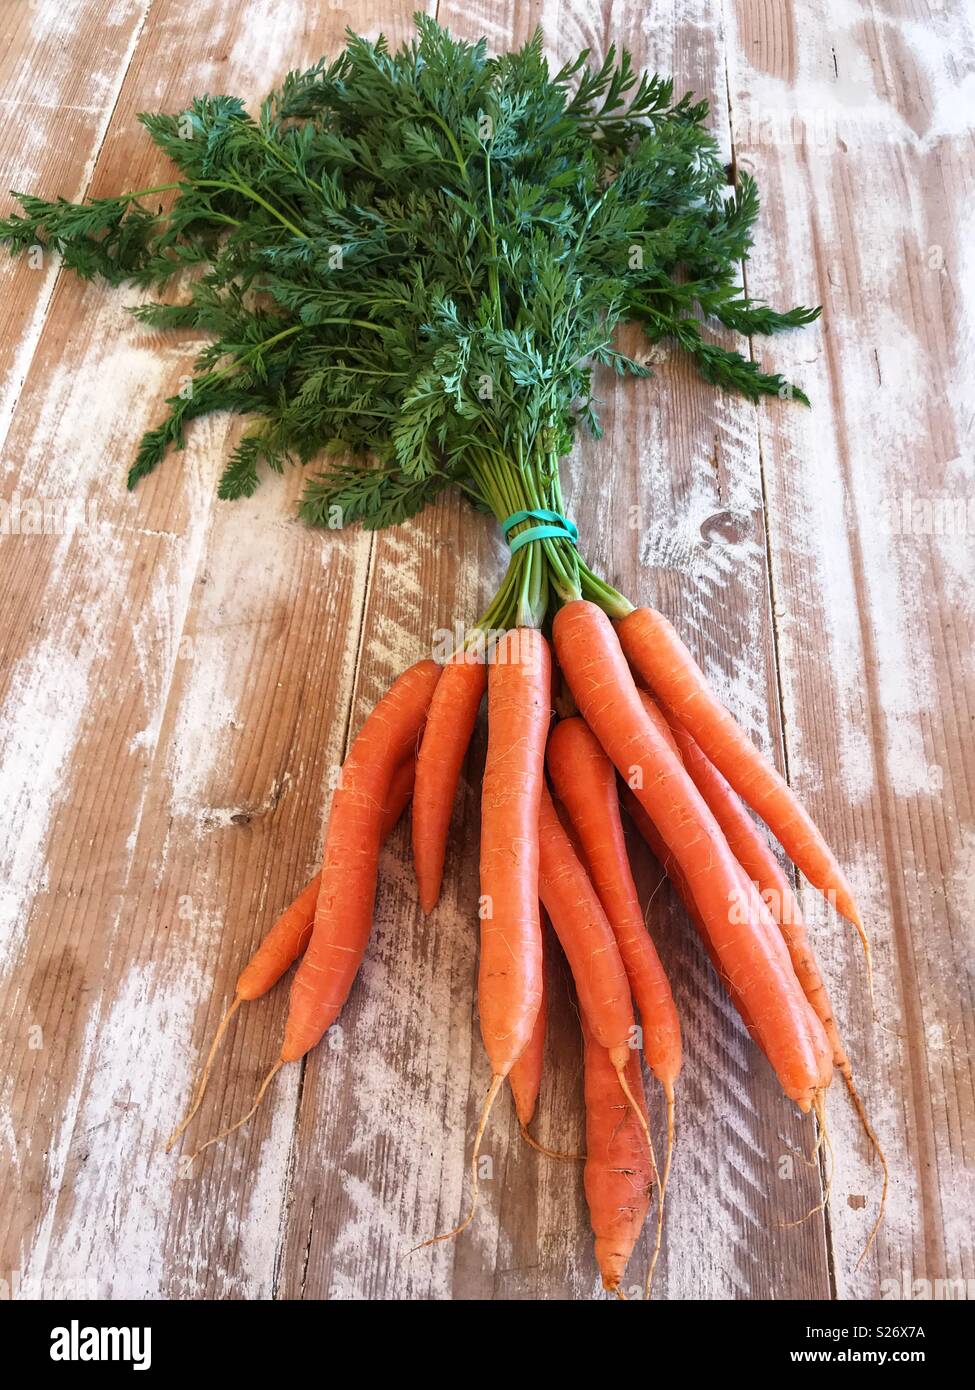 Fresh produce, bunch of Organic carrots with carrot greens, high angle view Stock Photo